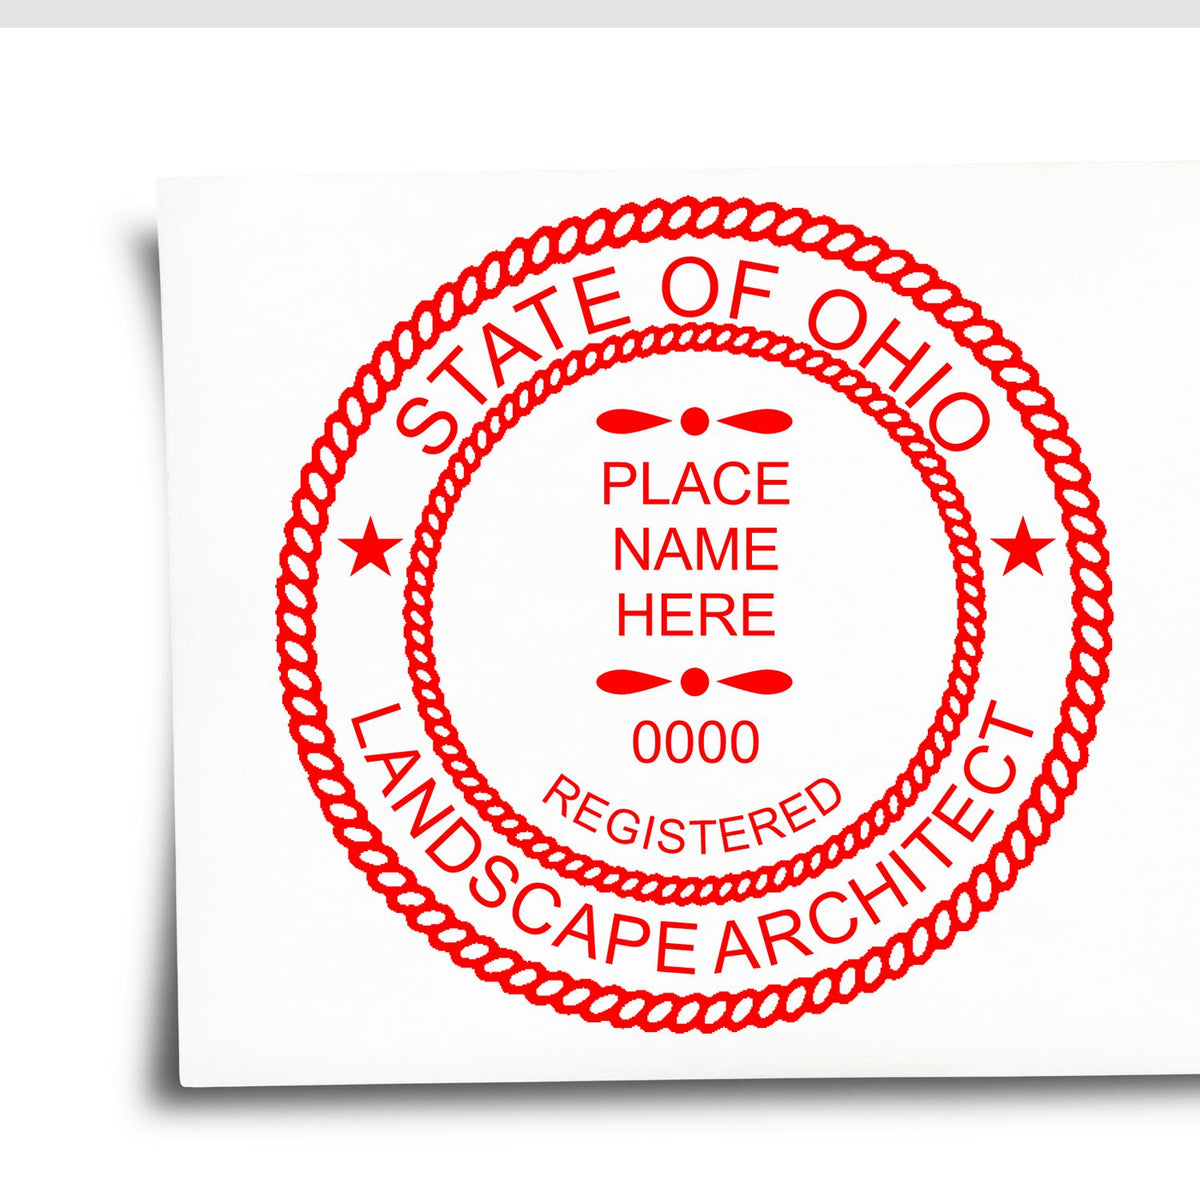 An alternative view of the Premium MaxLight Pre-Inked Ohio Landscape Architectural Stamp stamped on a sheet of paper showing the image in use